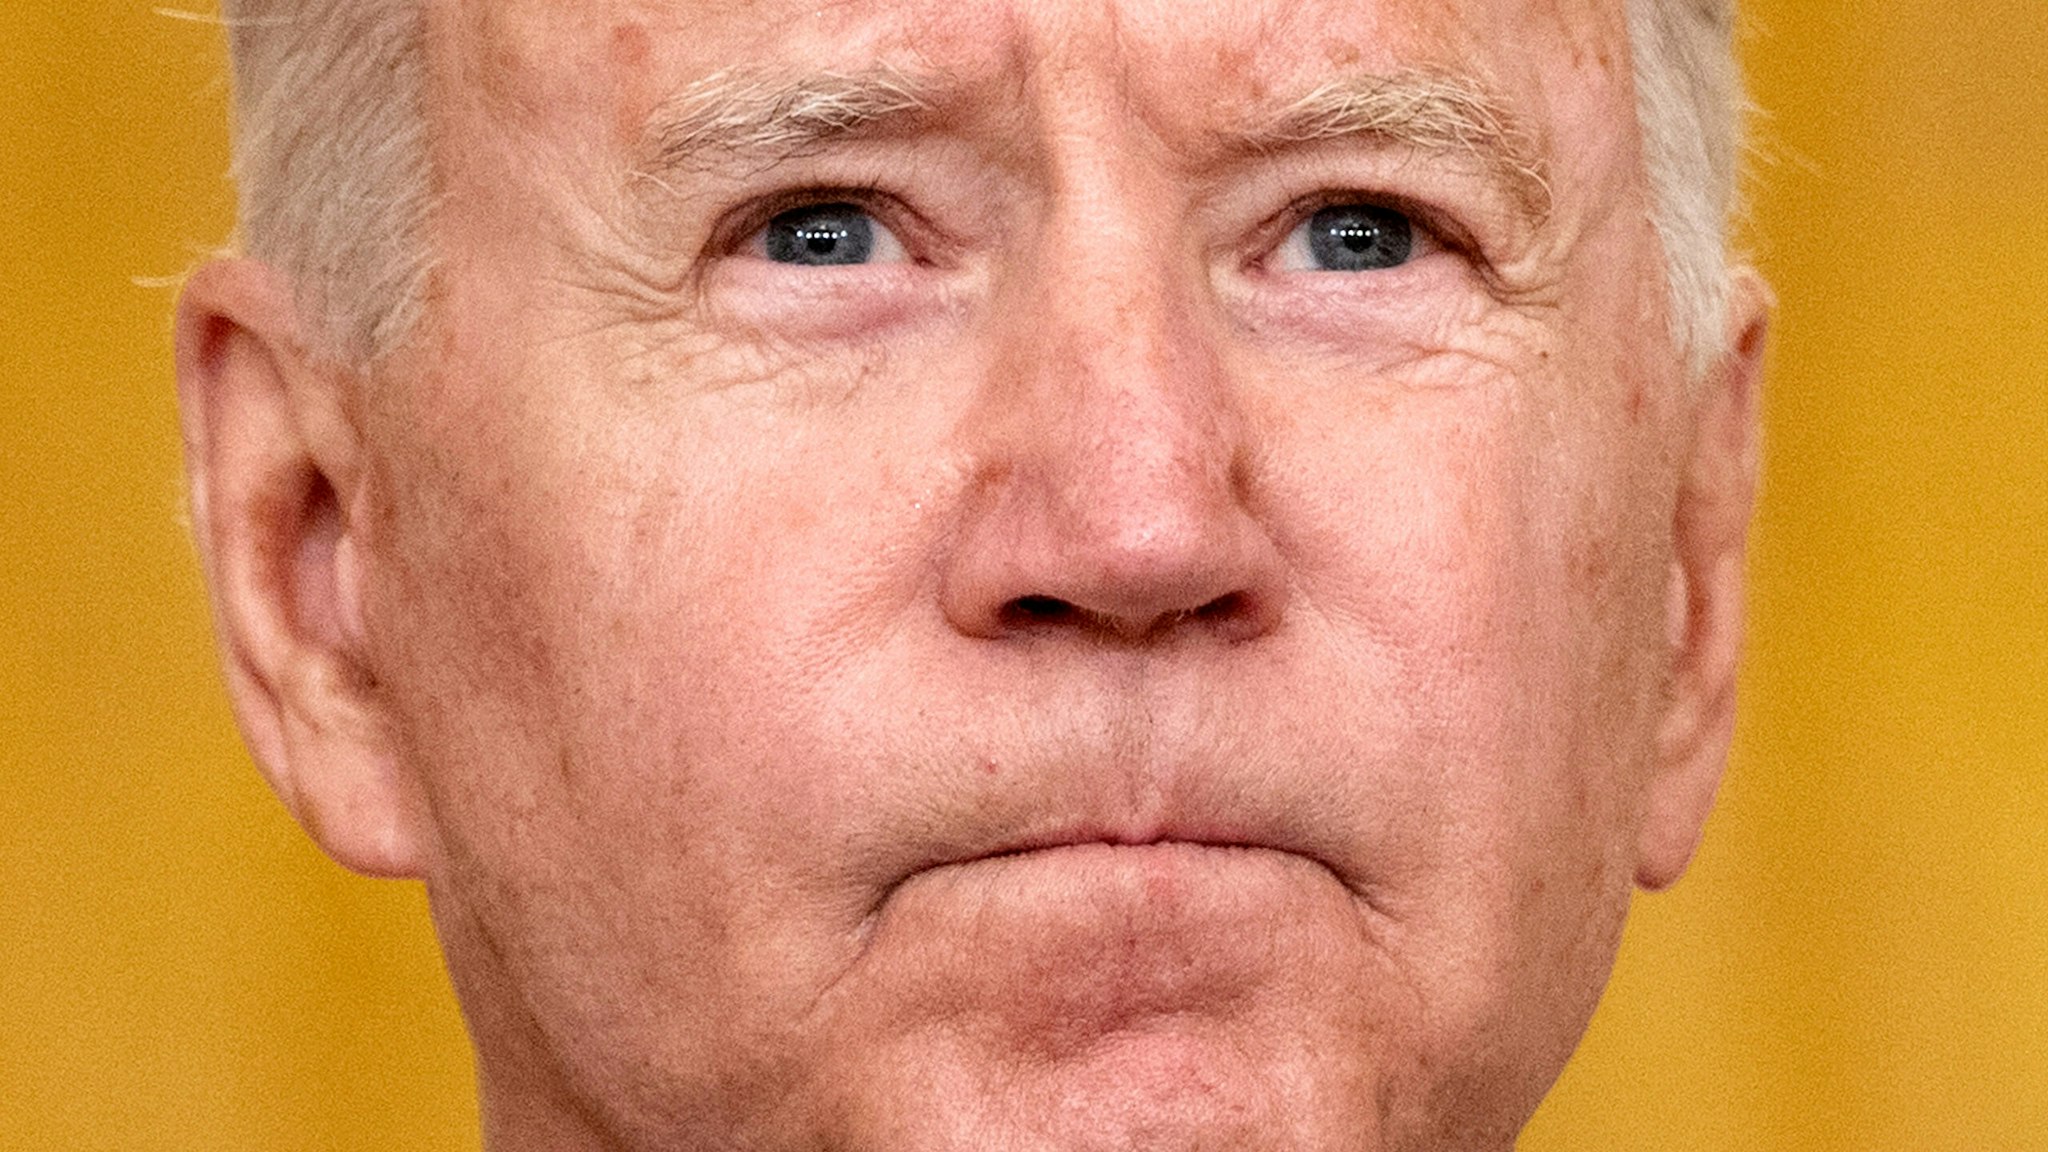 TOPSHOT - US President Joe Biden pauses as he delivers remarks on the terror attack at Hamid Karzai International Airport, and the US service members and Afghan victims killed and wounded, in the East Room of the White House, Washington, DC on August 26, 2021.